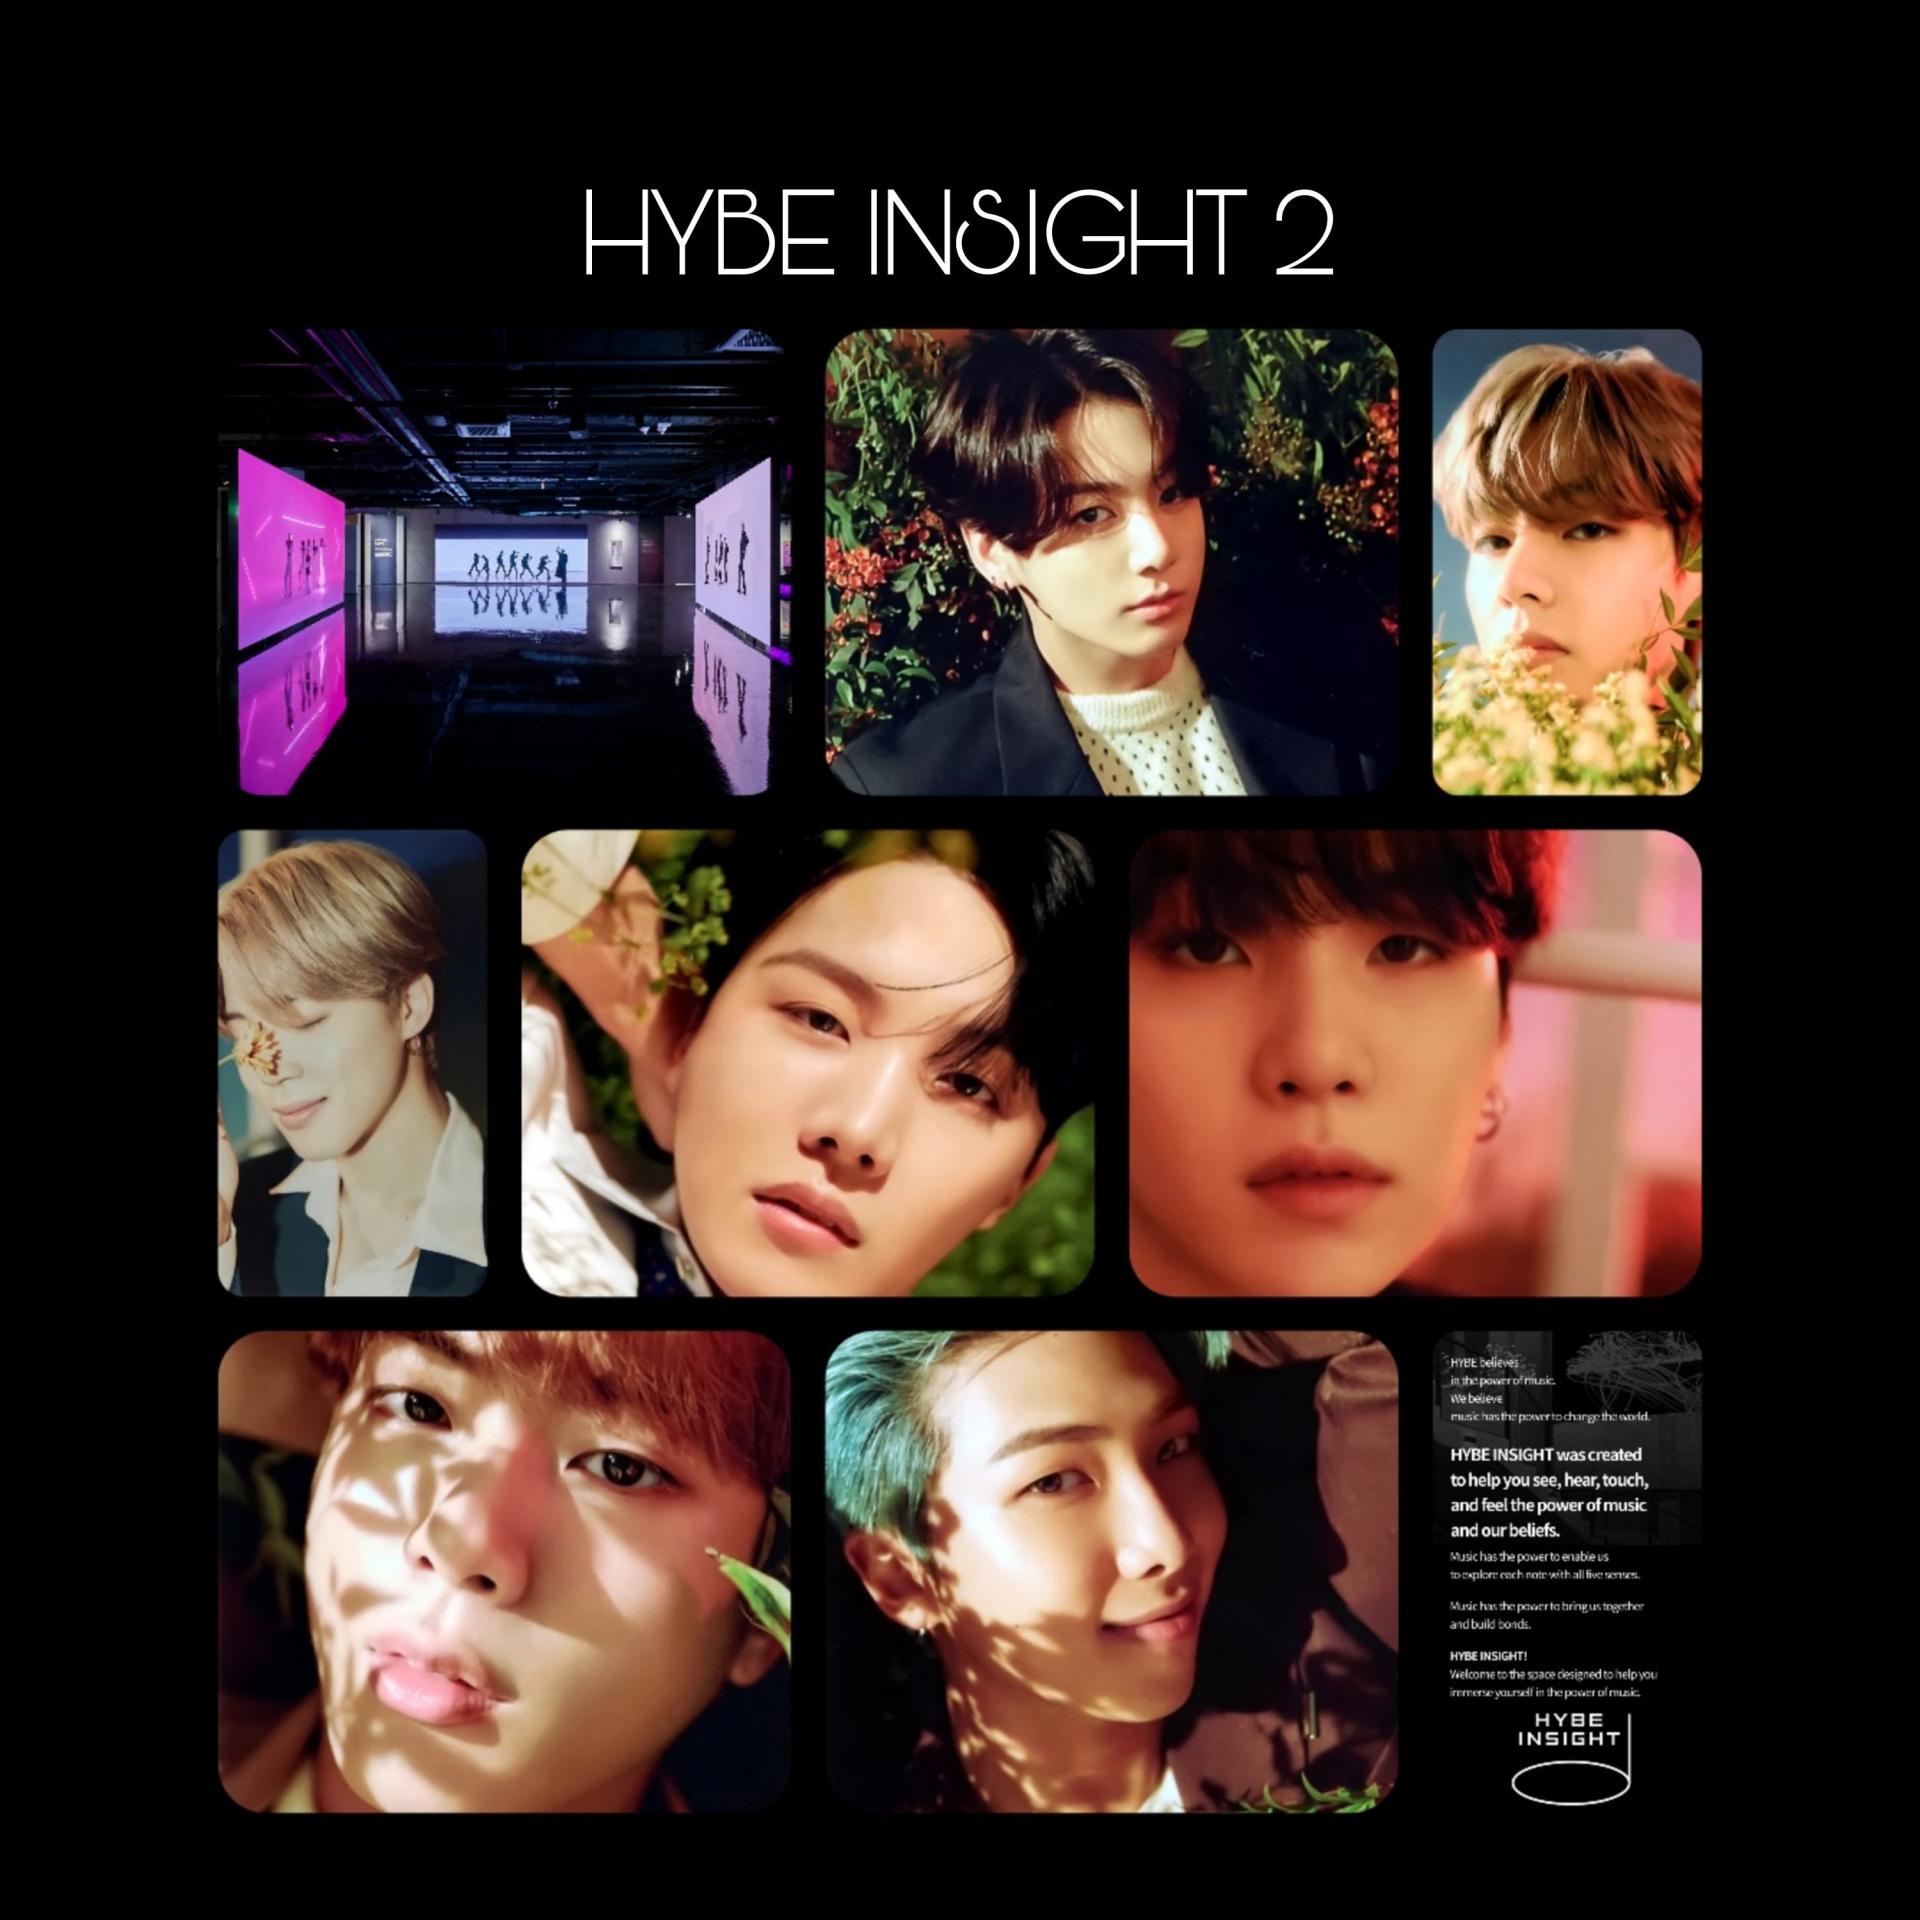 BTS HYBE Insight Visitor Photocards